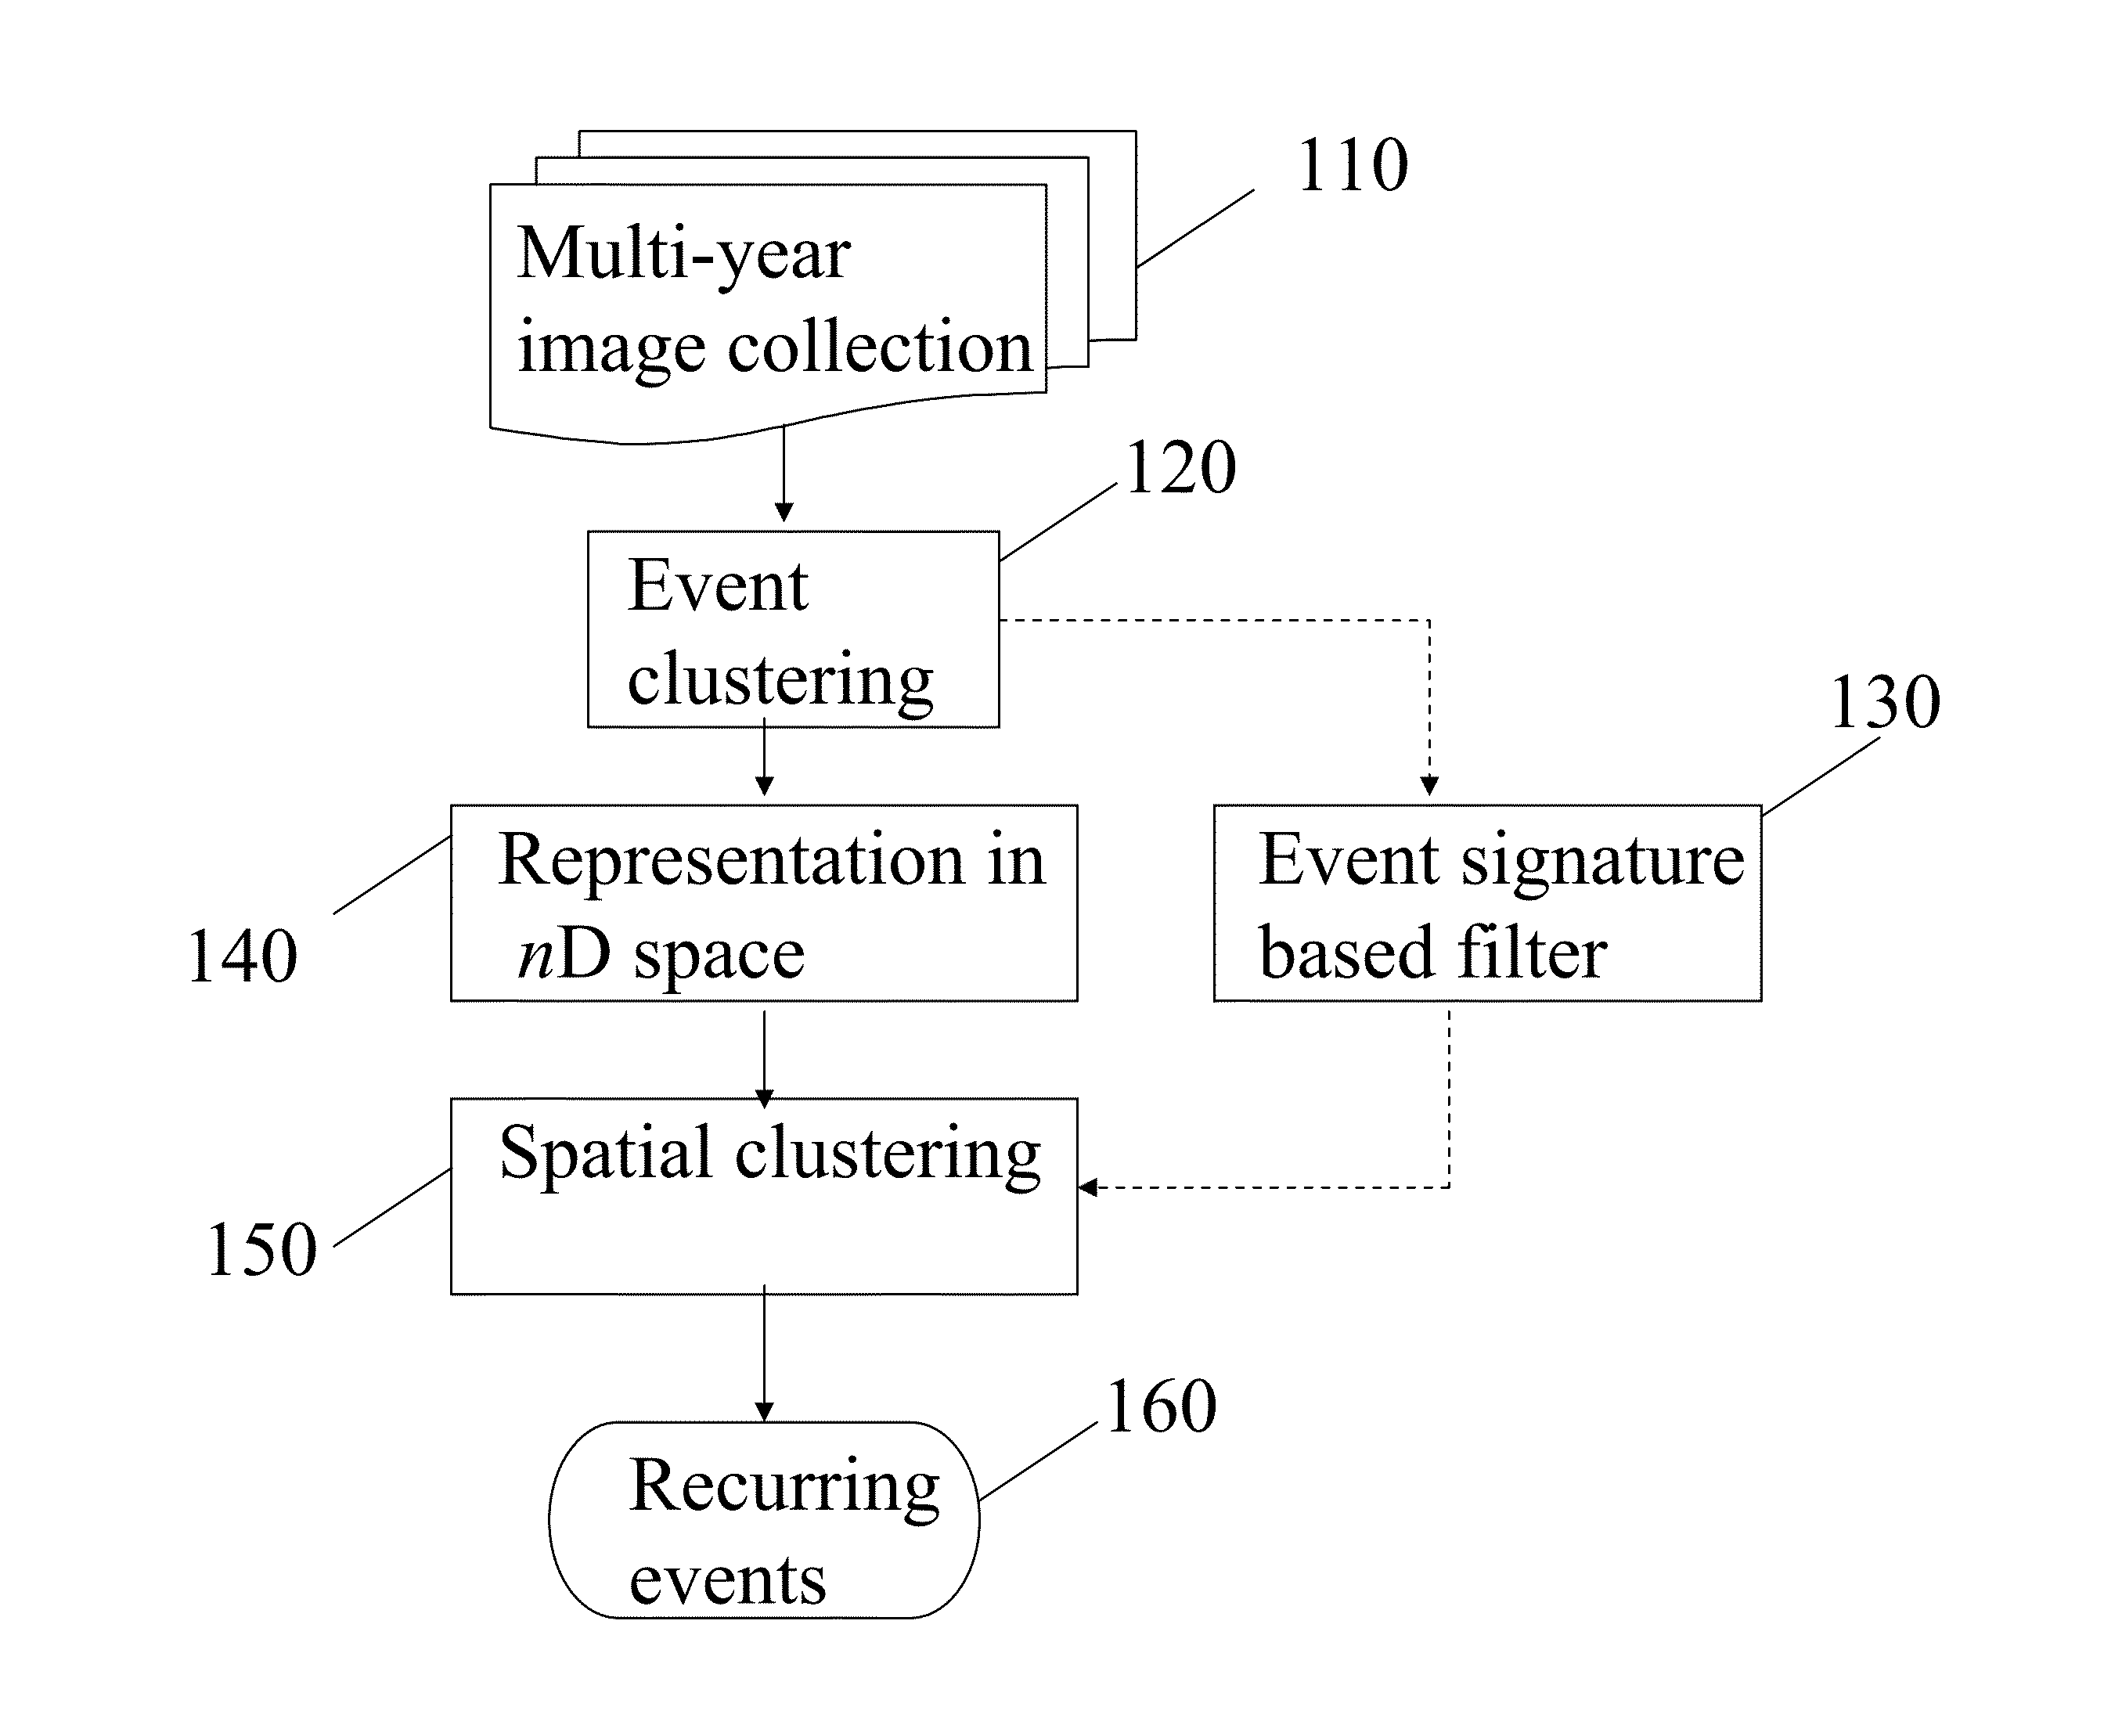 Detecting recurring events in consumer image collections